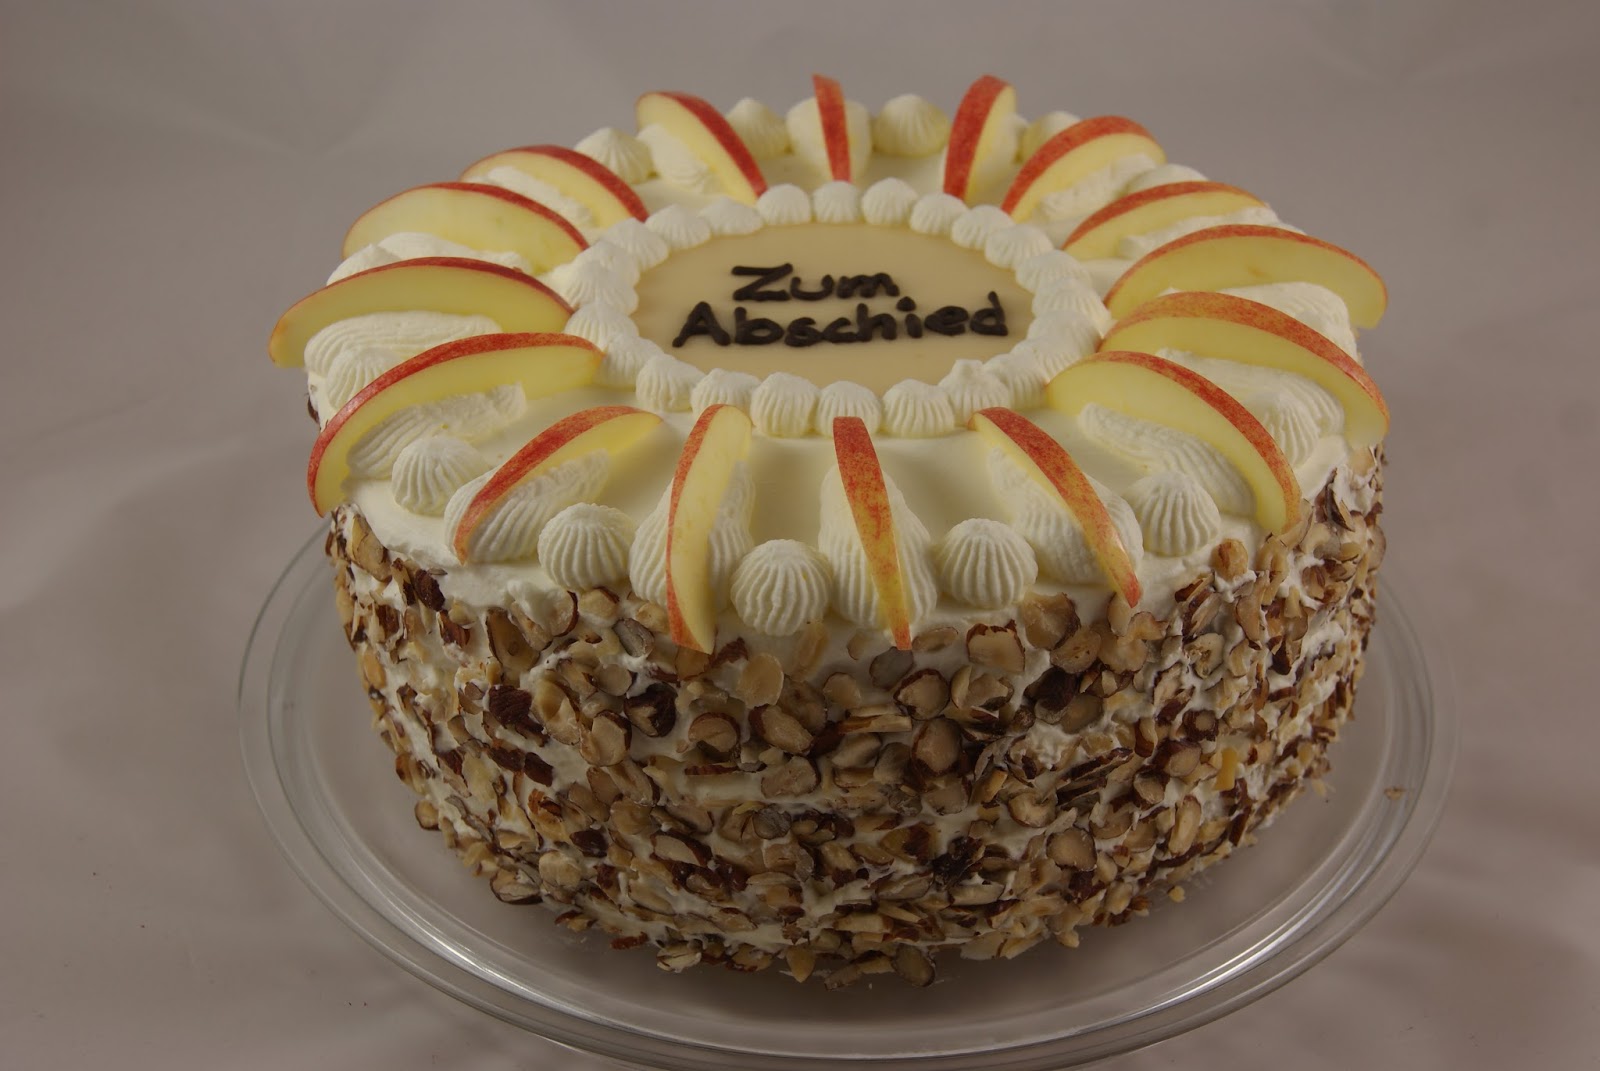 biscuit and buttercream: Apfel-Haselnuss-Torte